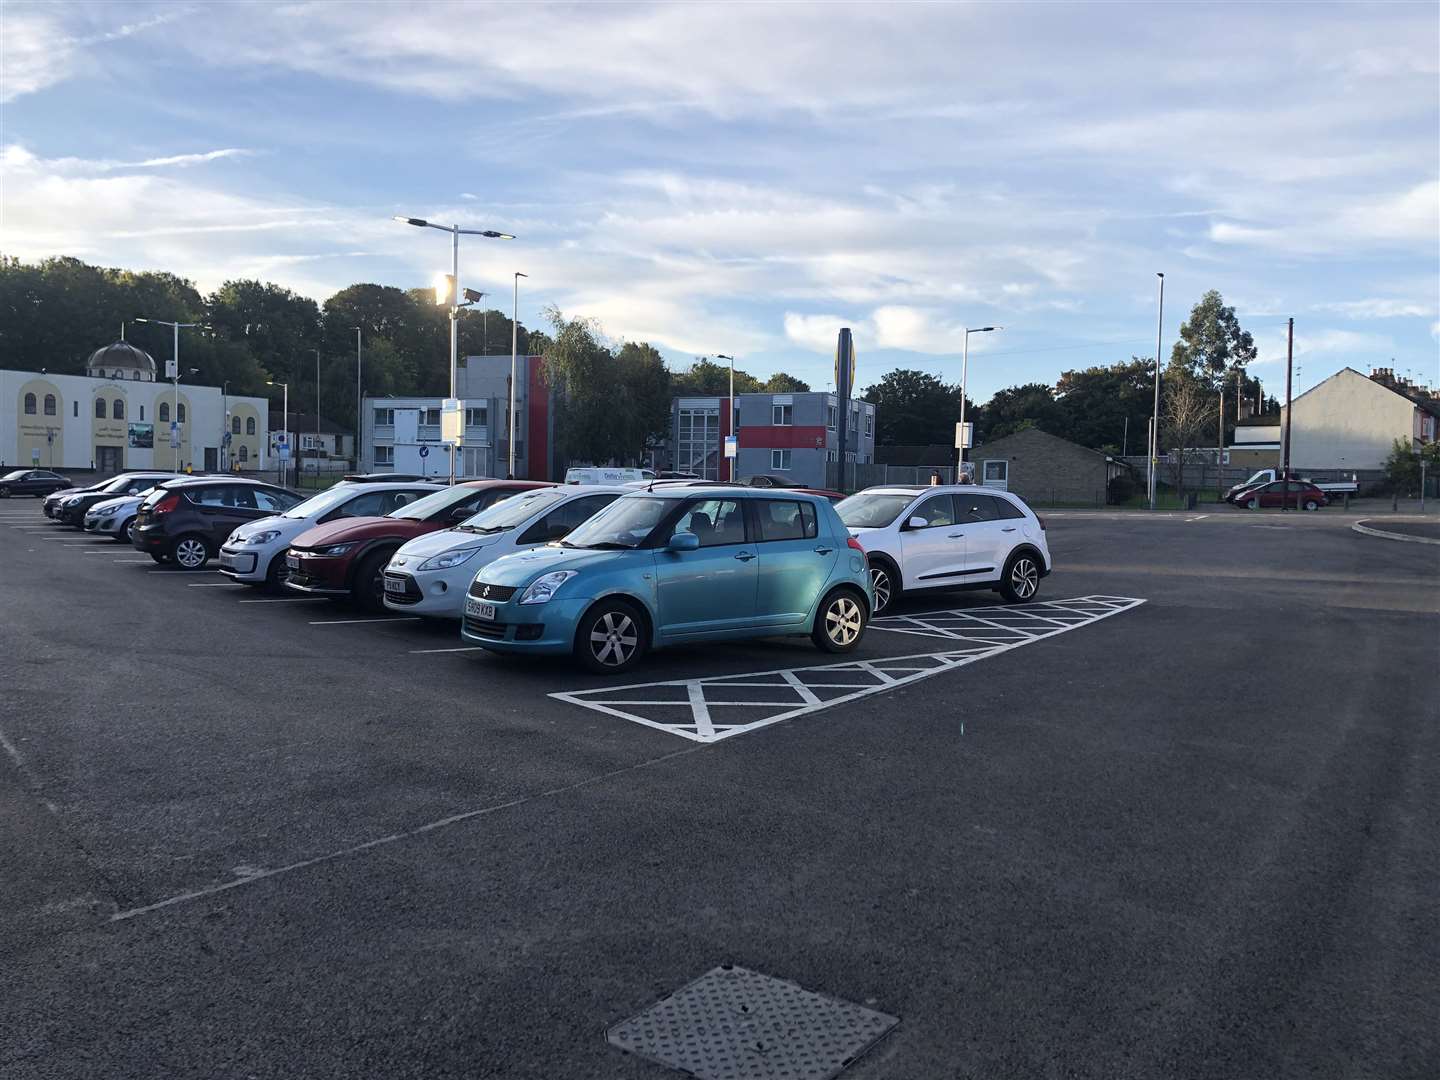 The car park quickly filled up